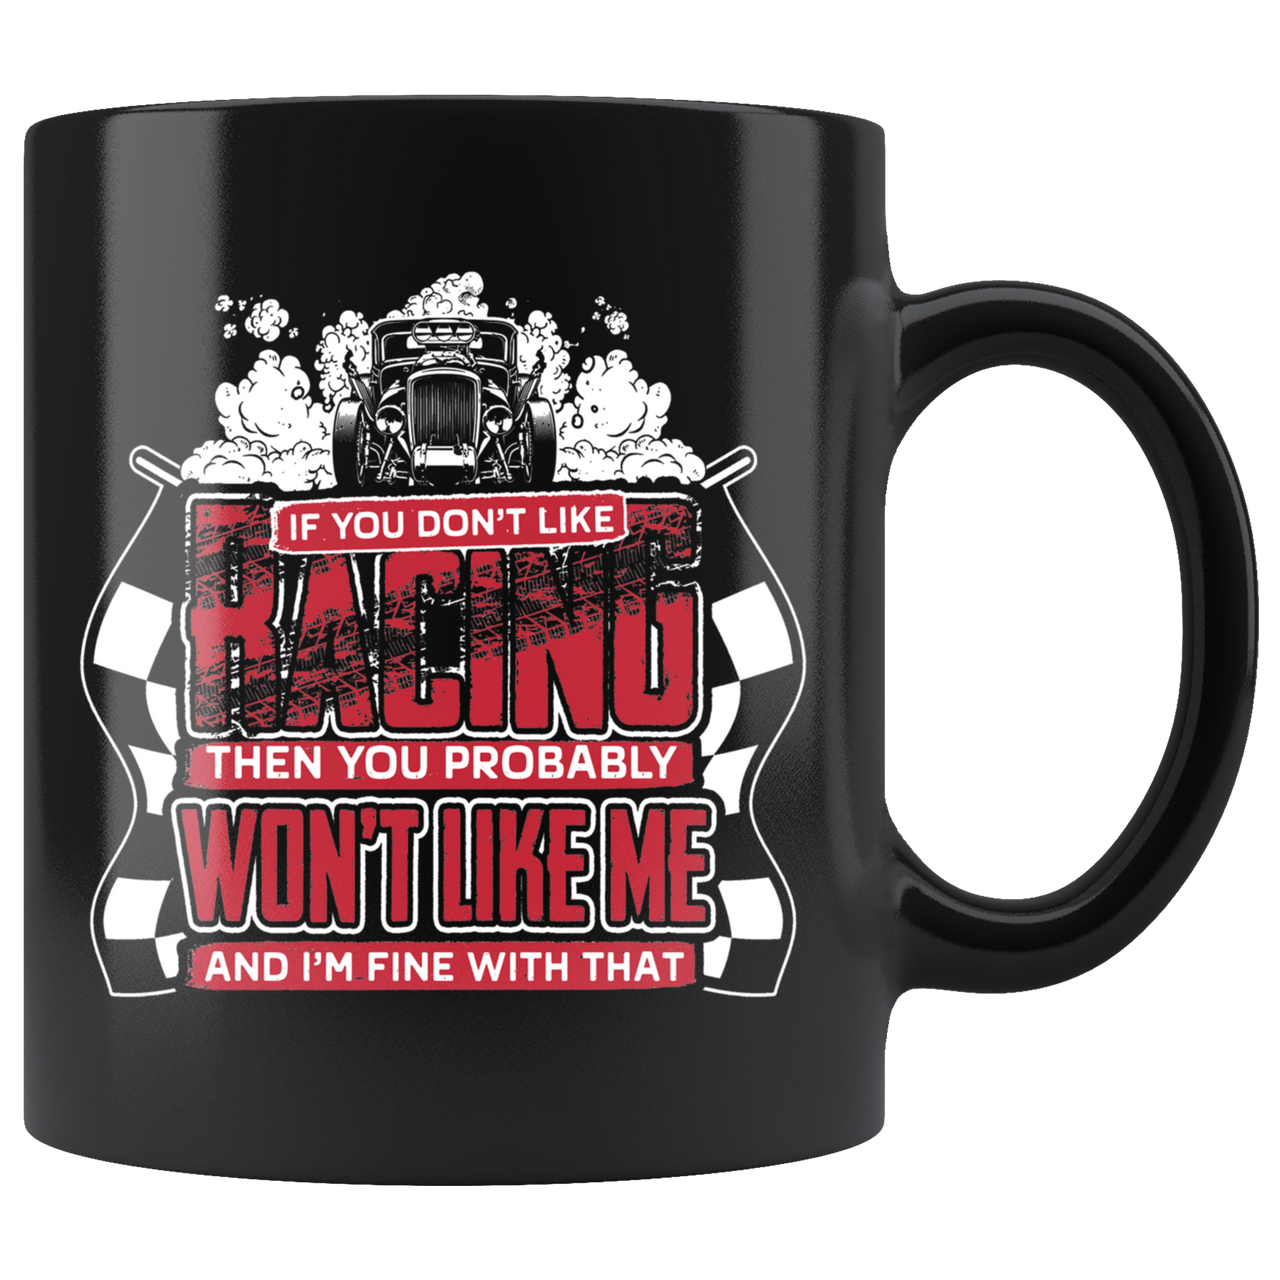 If You Don't Like Racing Then You Probably Won't Like Me And I'm Fine With That Mug!